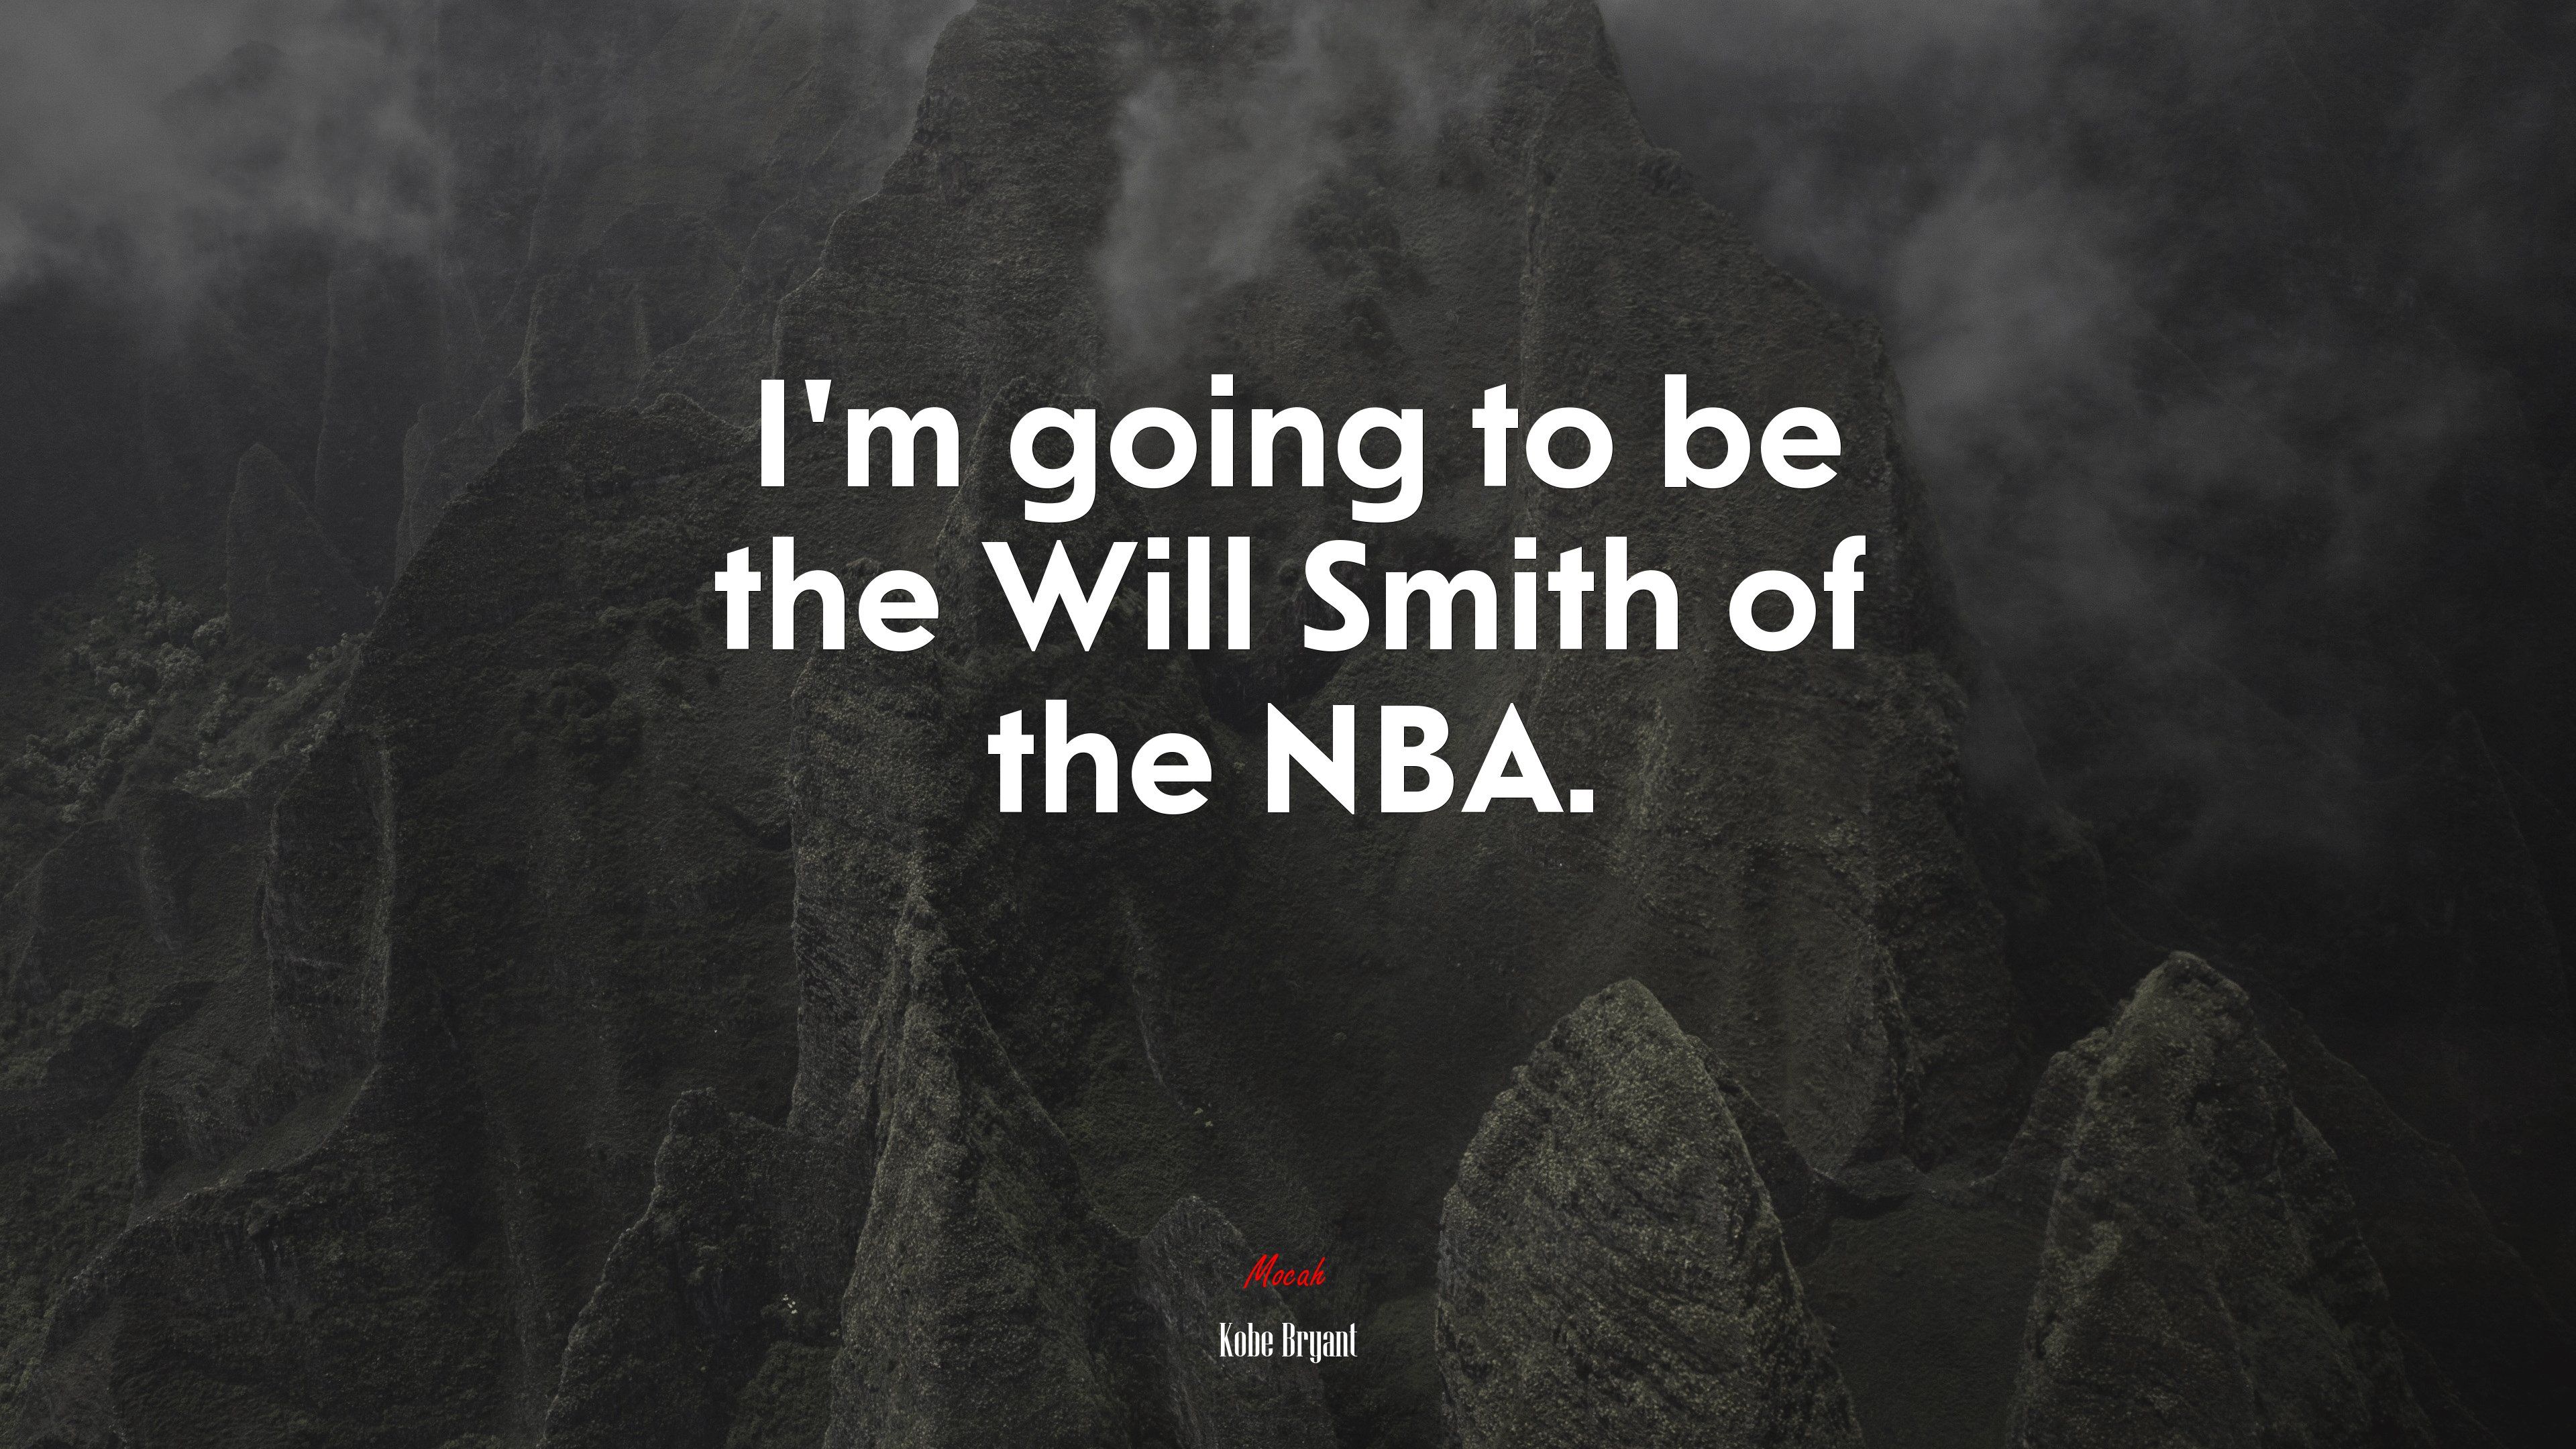 I'm going to be the Will Smith of the NBA. Kobe Bryant quote, 4k wallpaper. Mocah.org HD Desktop Wallpaper